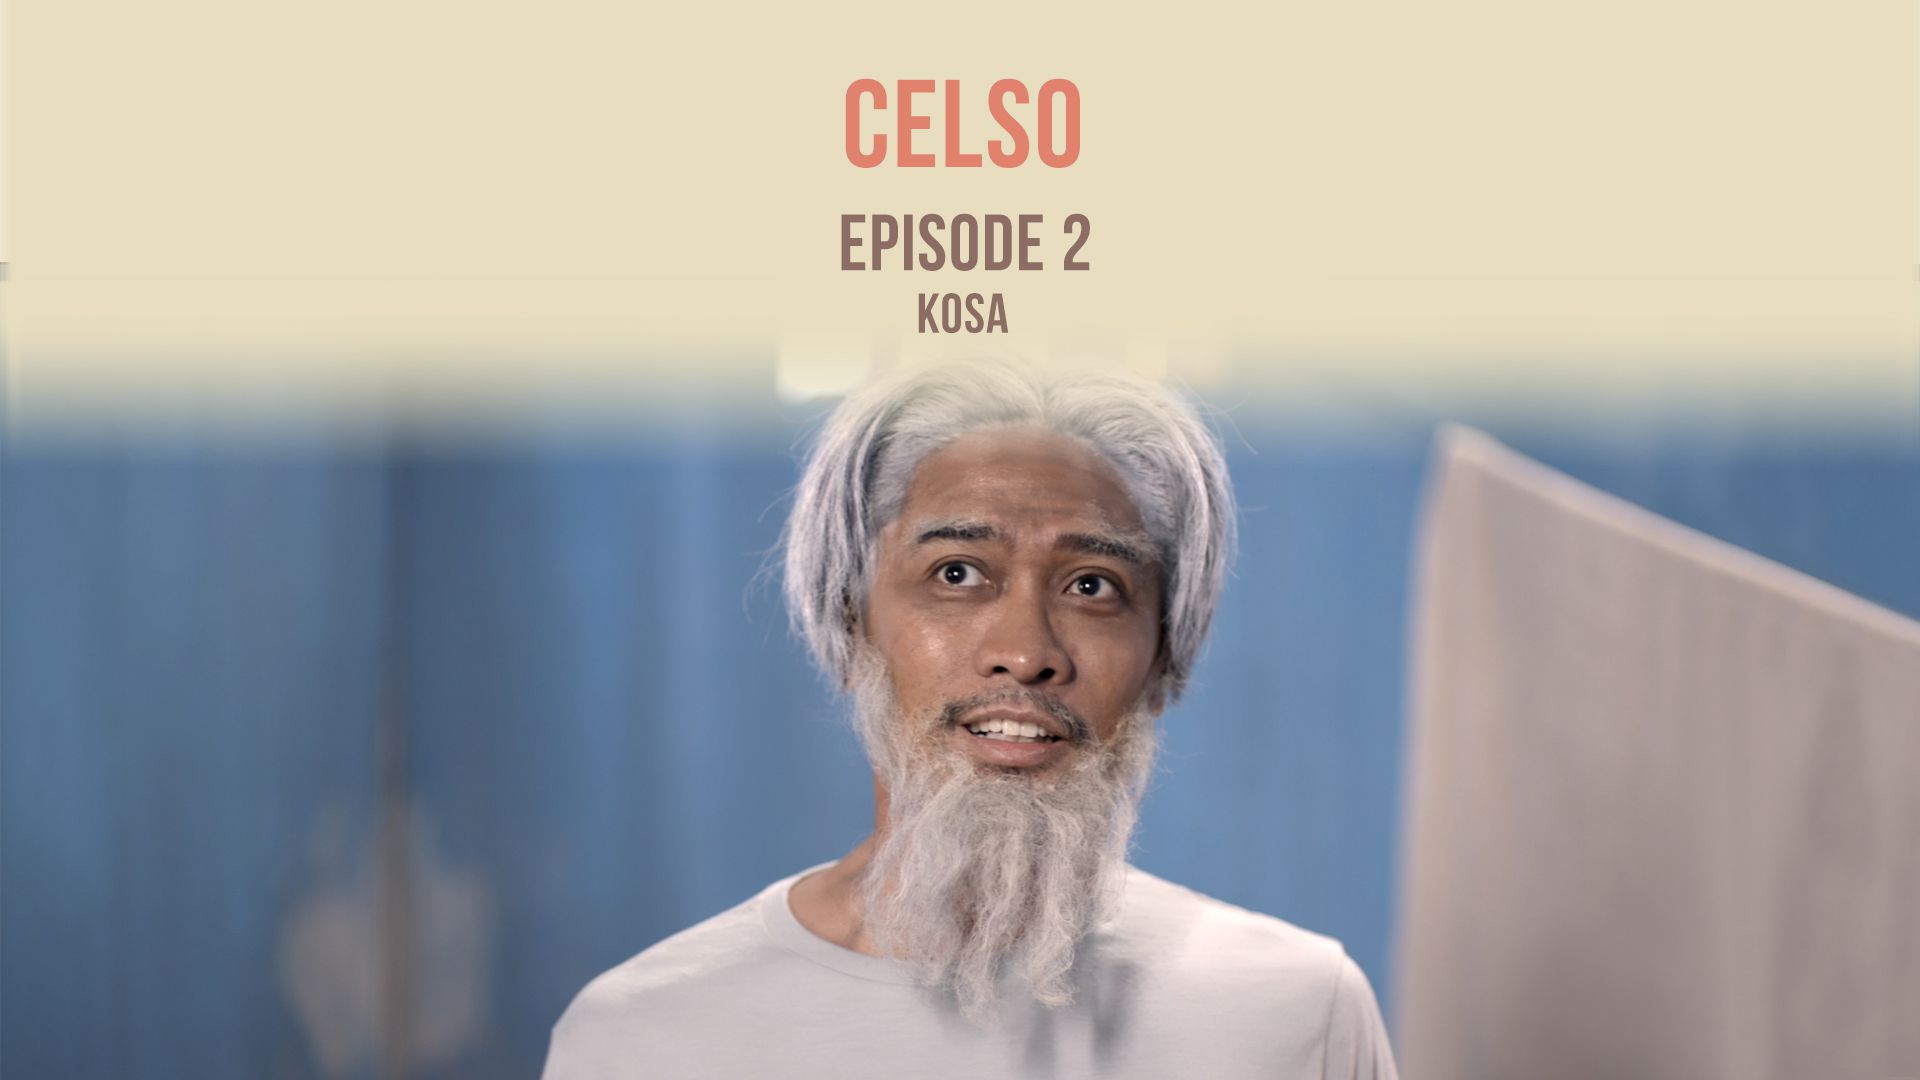 CELSO Episode 2